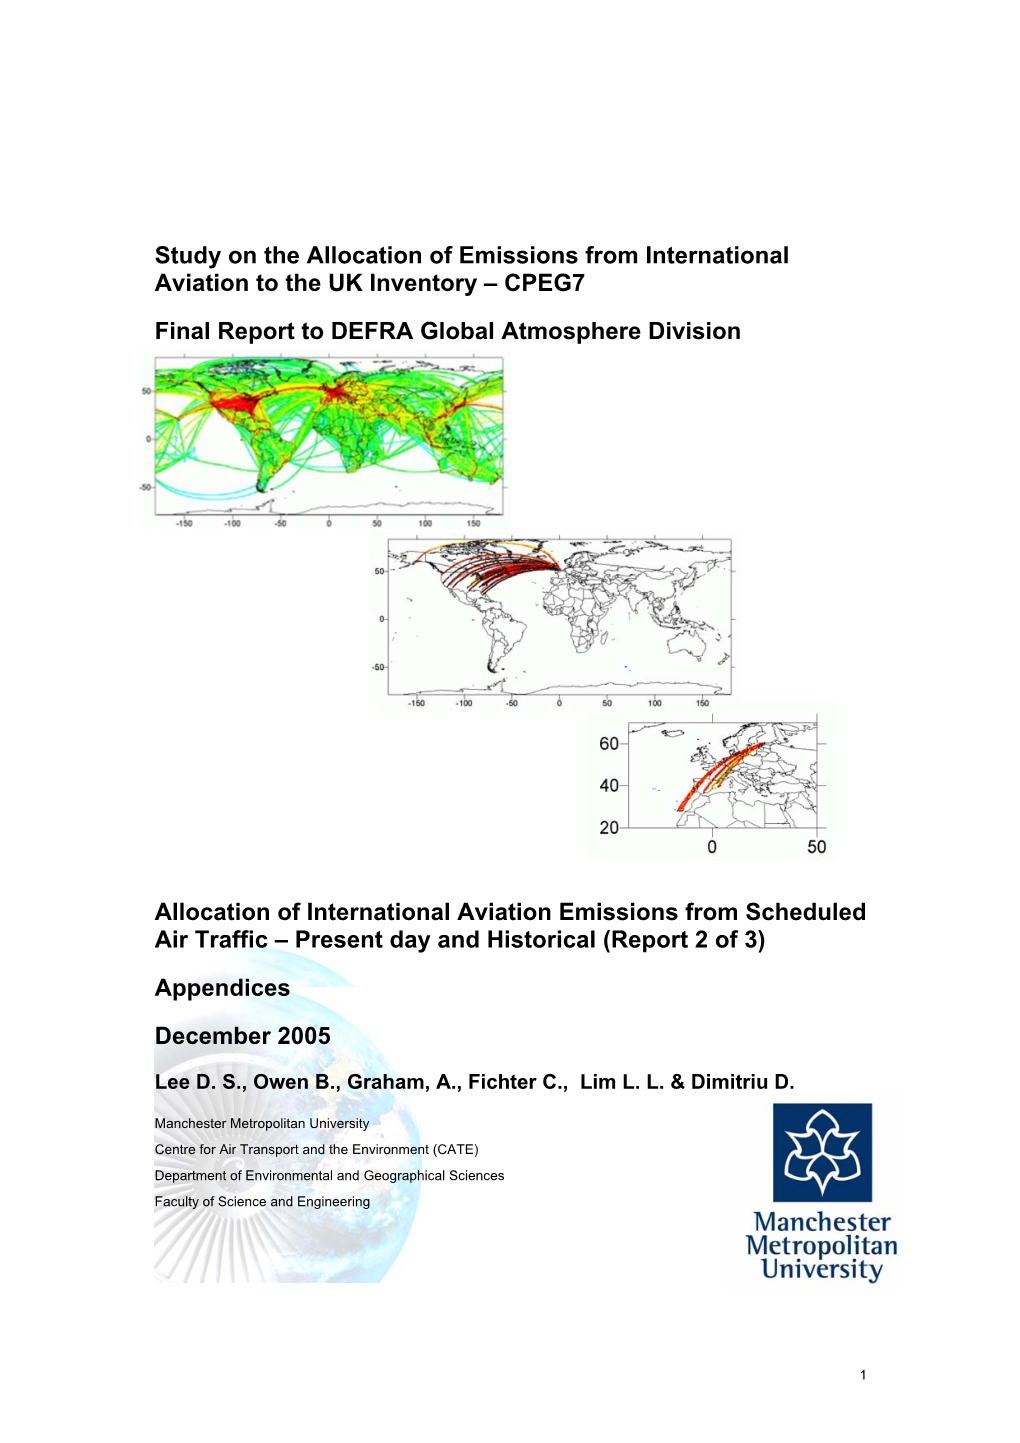 Study on the Allocation of Emissions from International Aviation to the UK Inventory – CPEG7